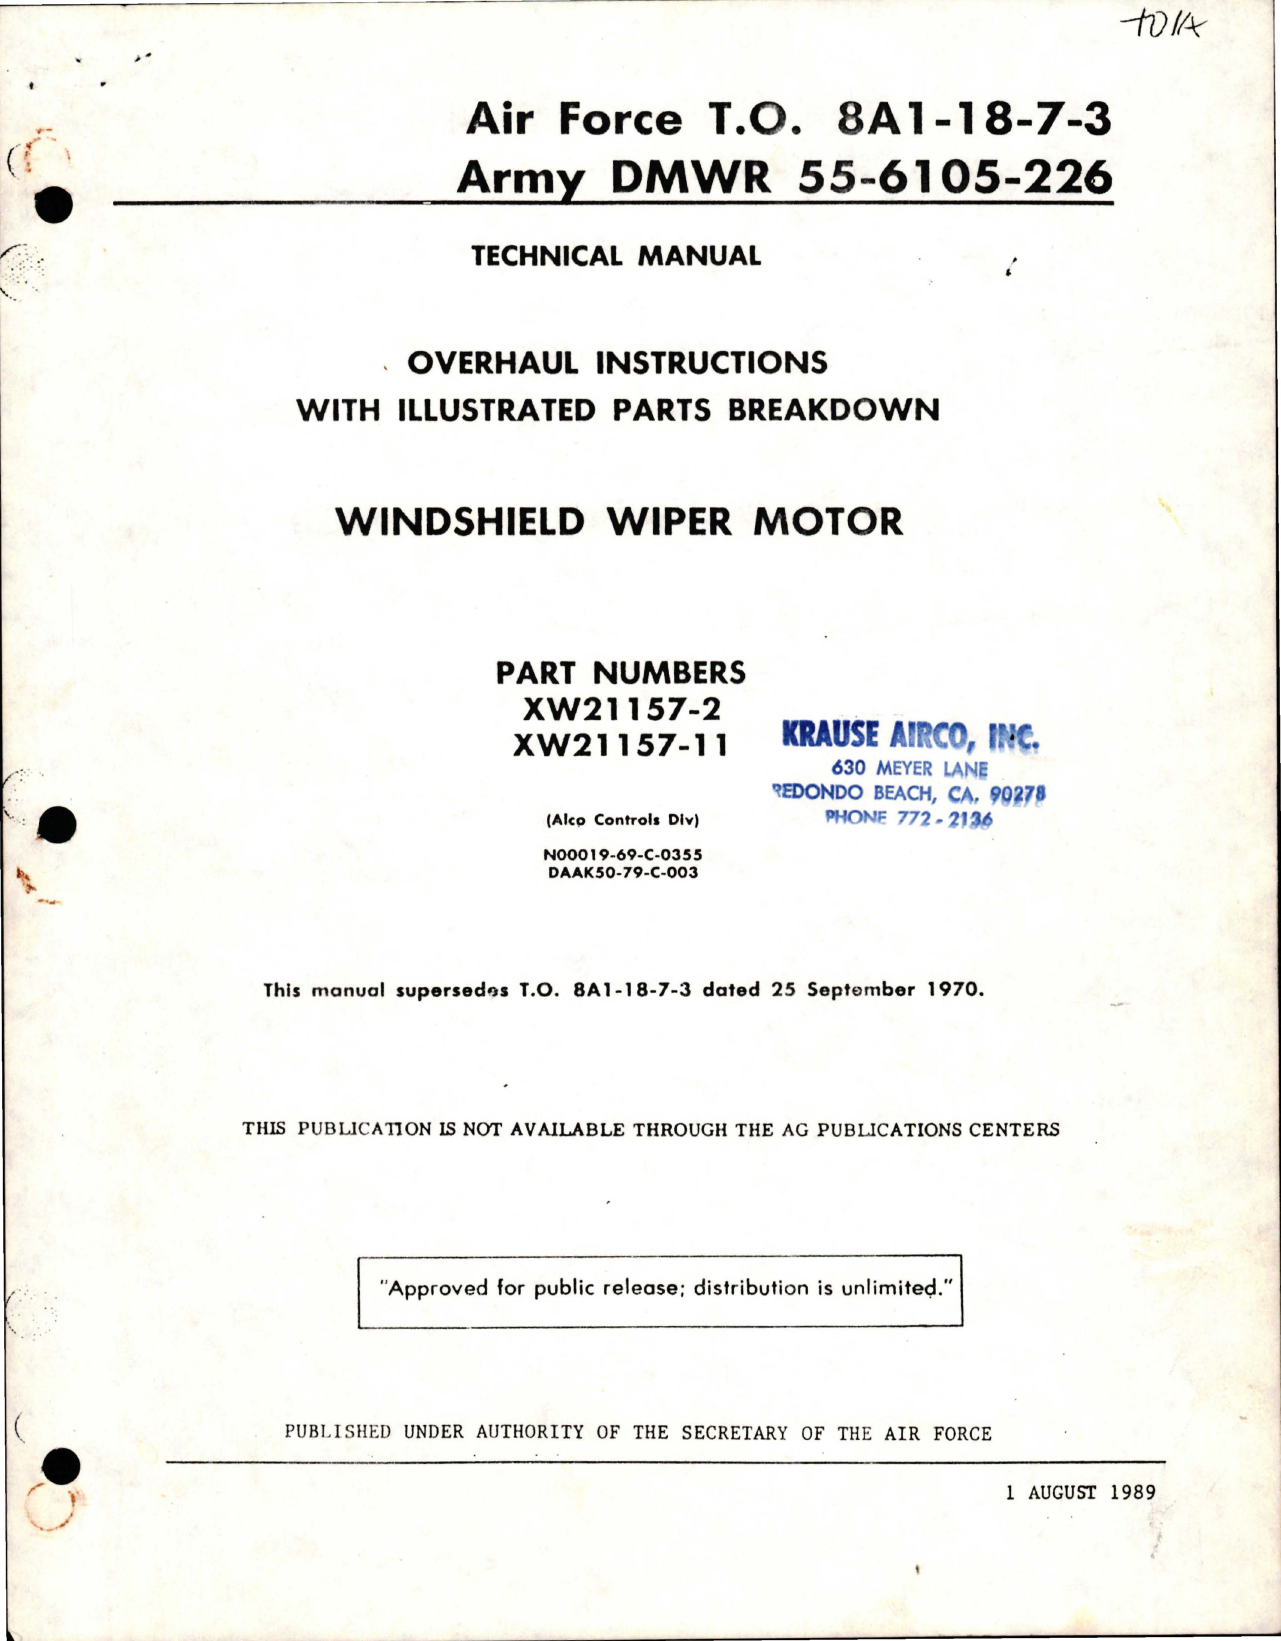 Sample page 1 from AirCorps Library document: Overhaul Instructions with Illustrated Parts Breakdown for Windshield Wiper Motor - Part XW21157-2 and XW21157-11 